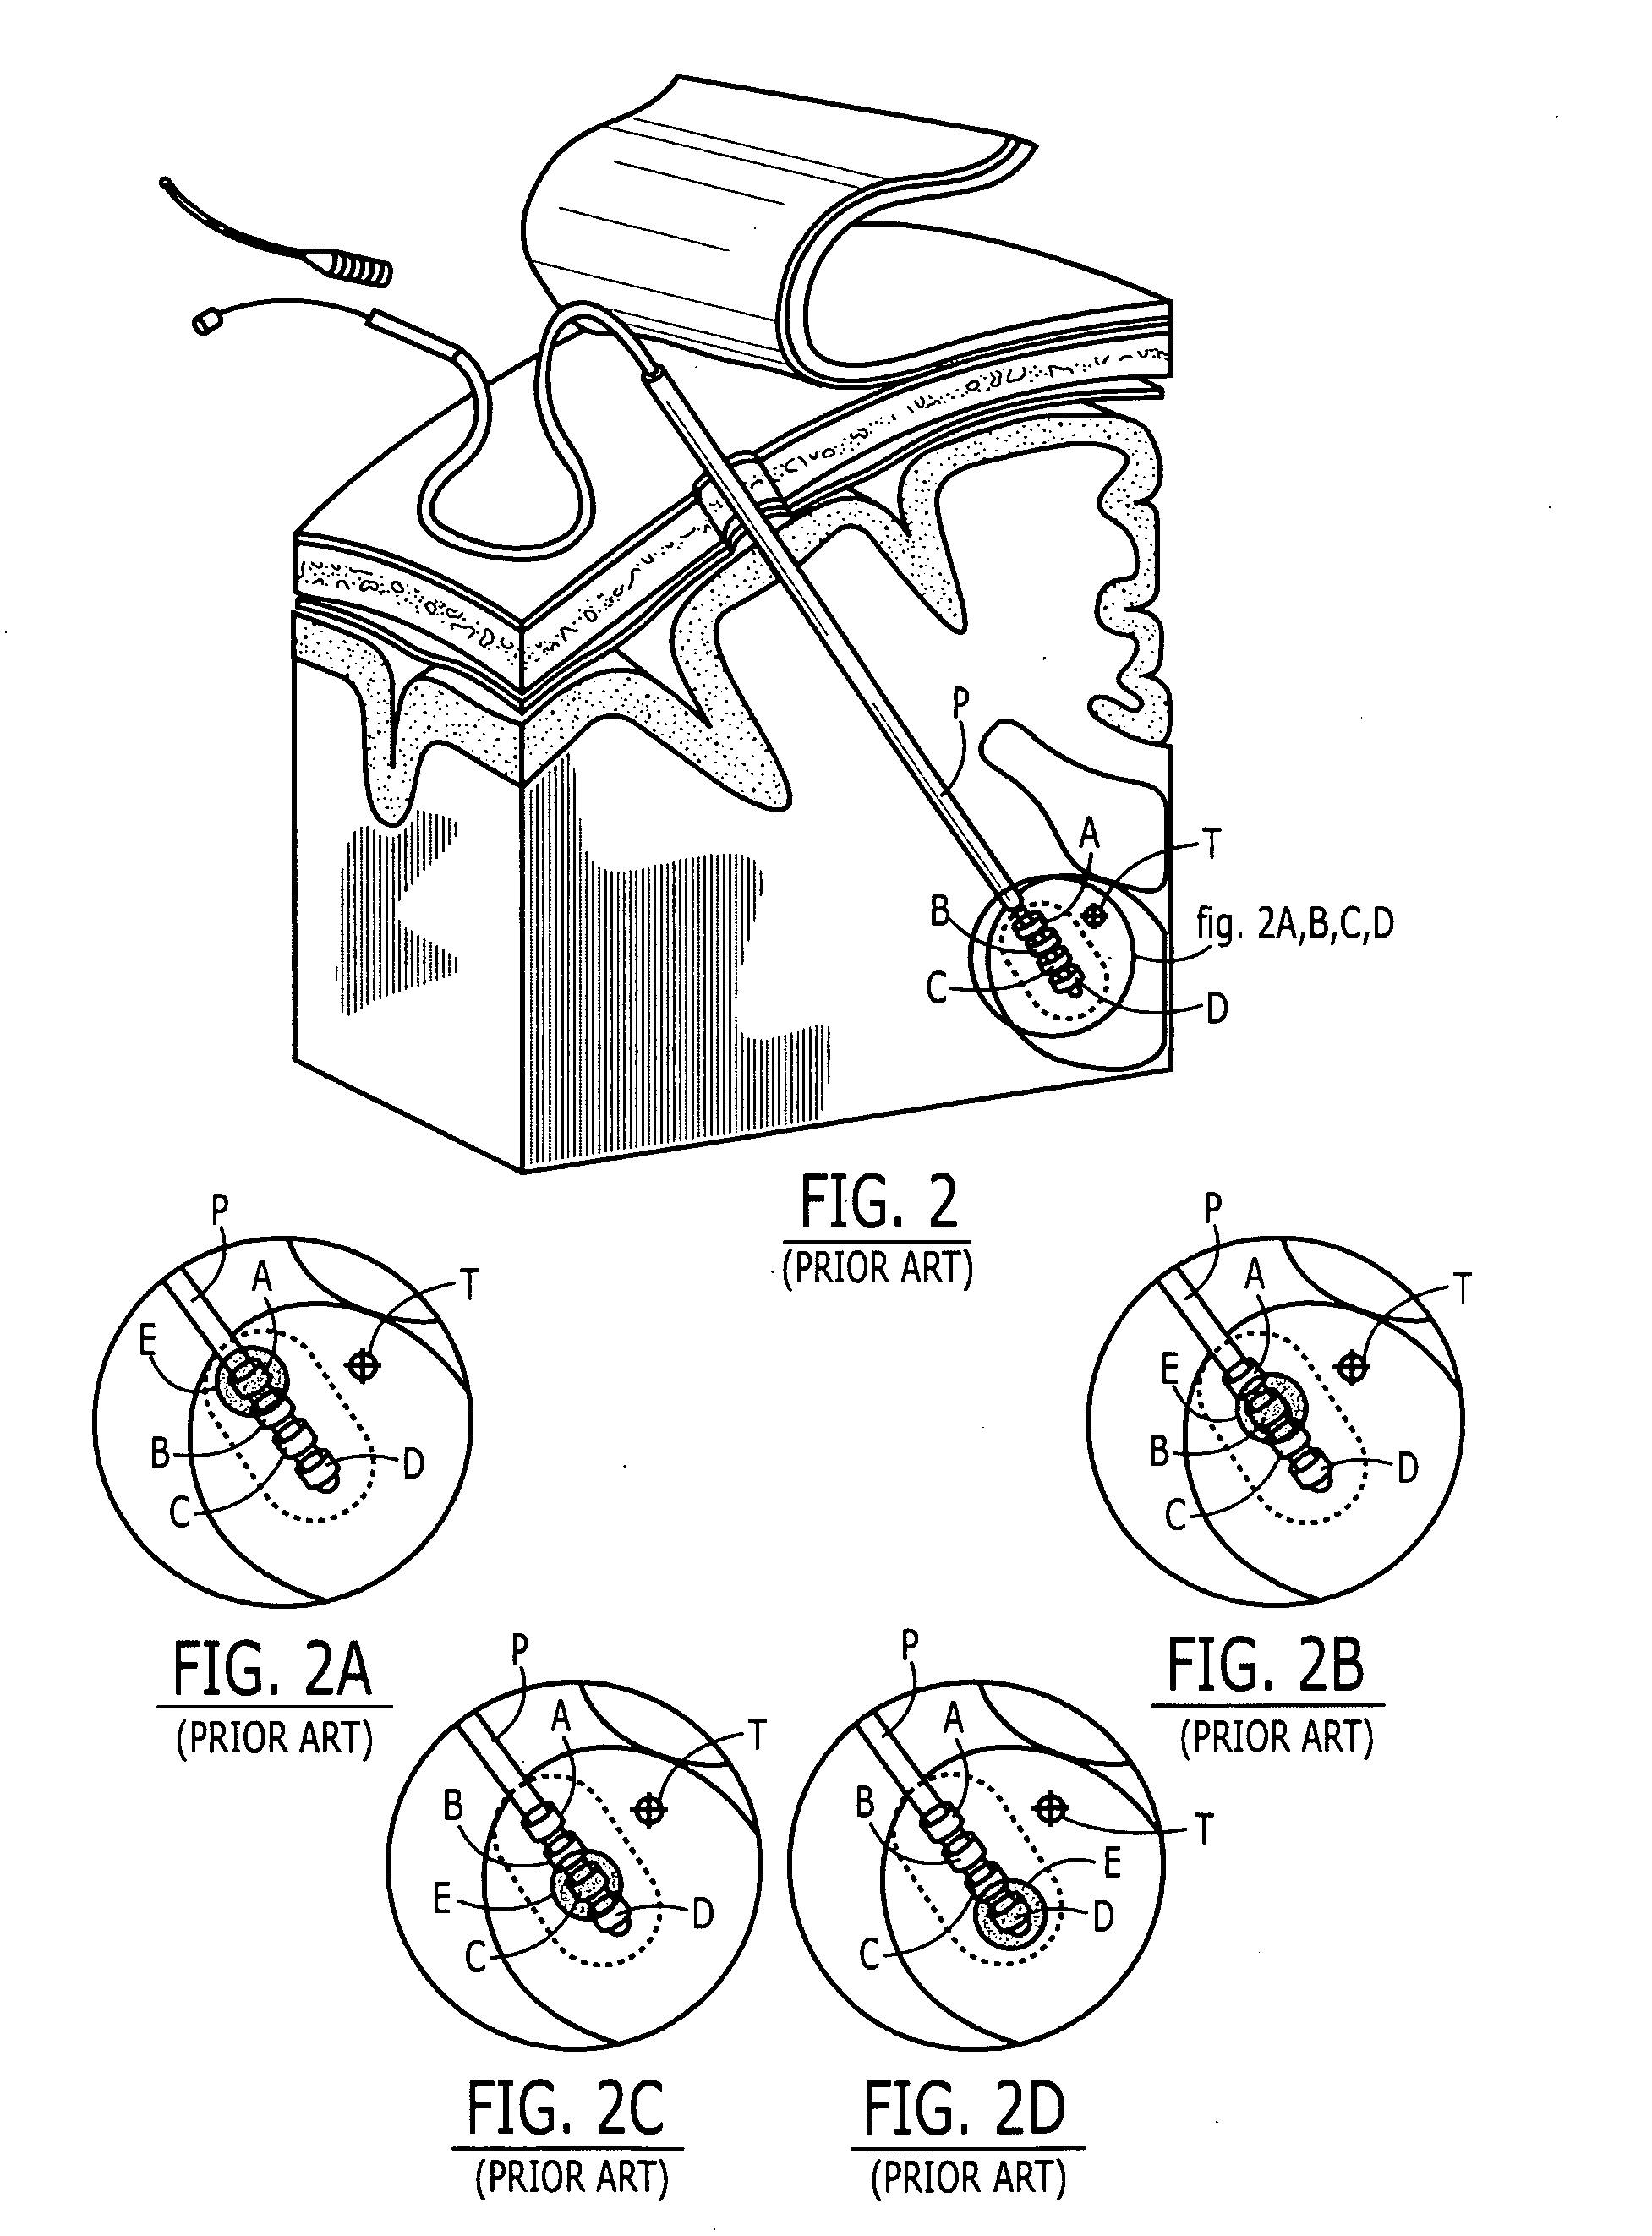 Various apparatus and methods for deep brain stimulating electrodes